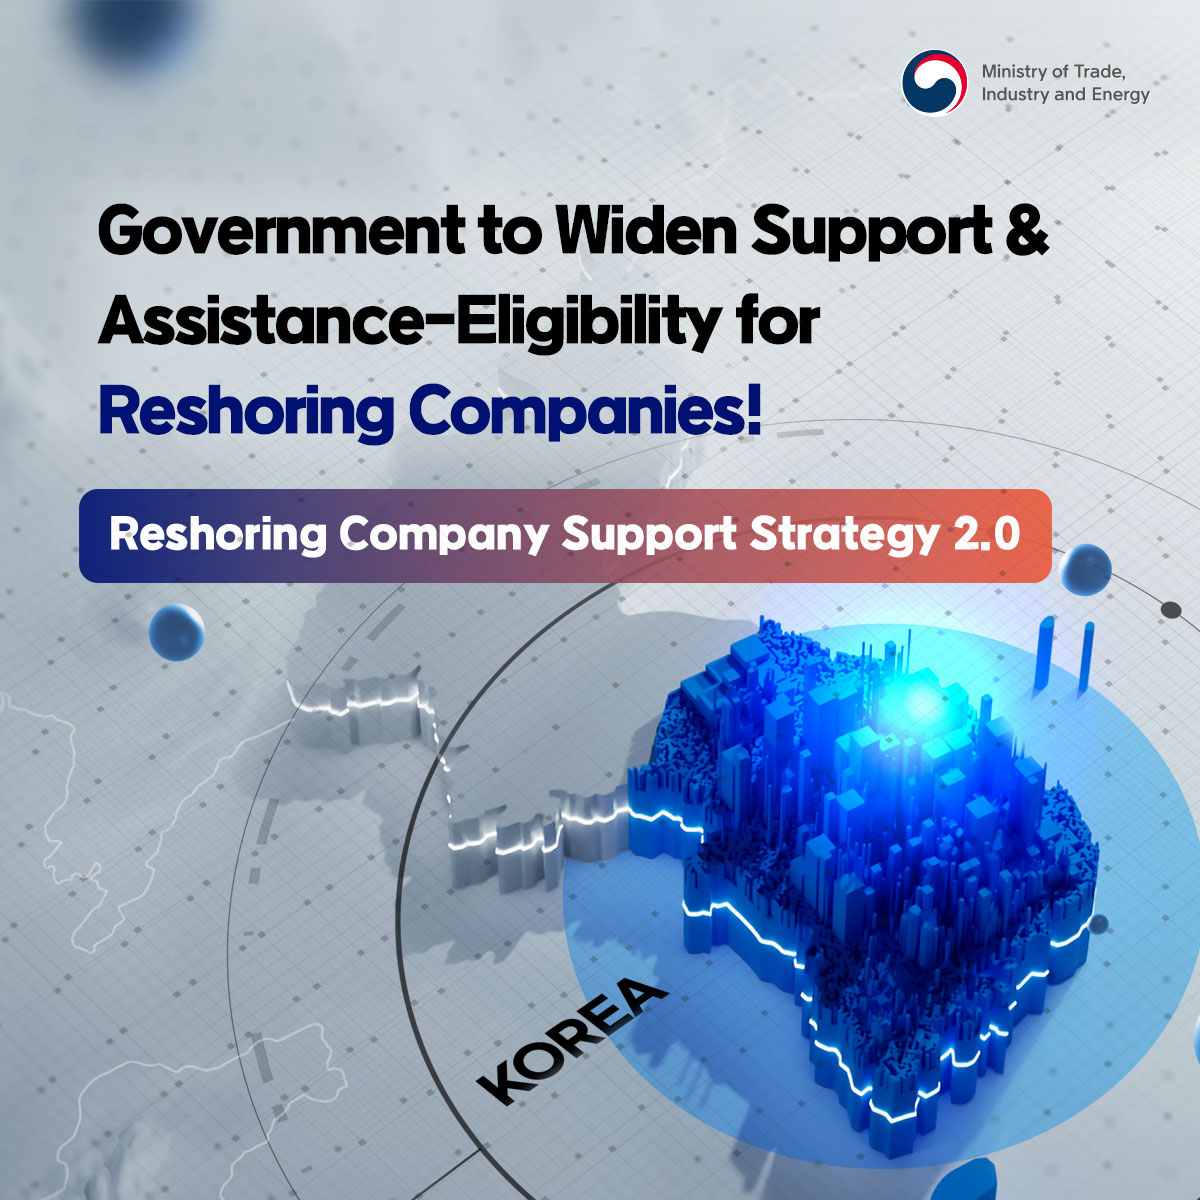 Reshoring Company Support Strategy 2.0